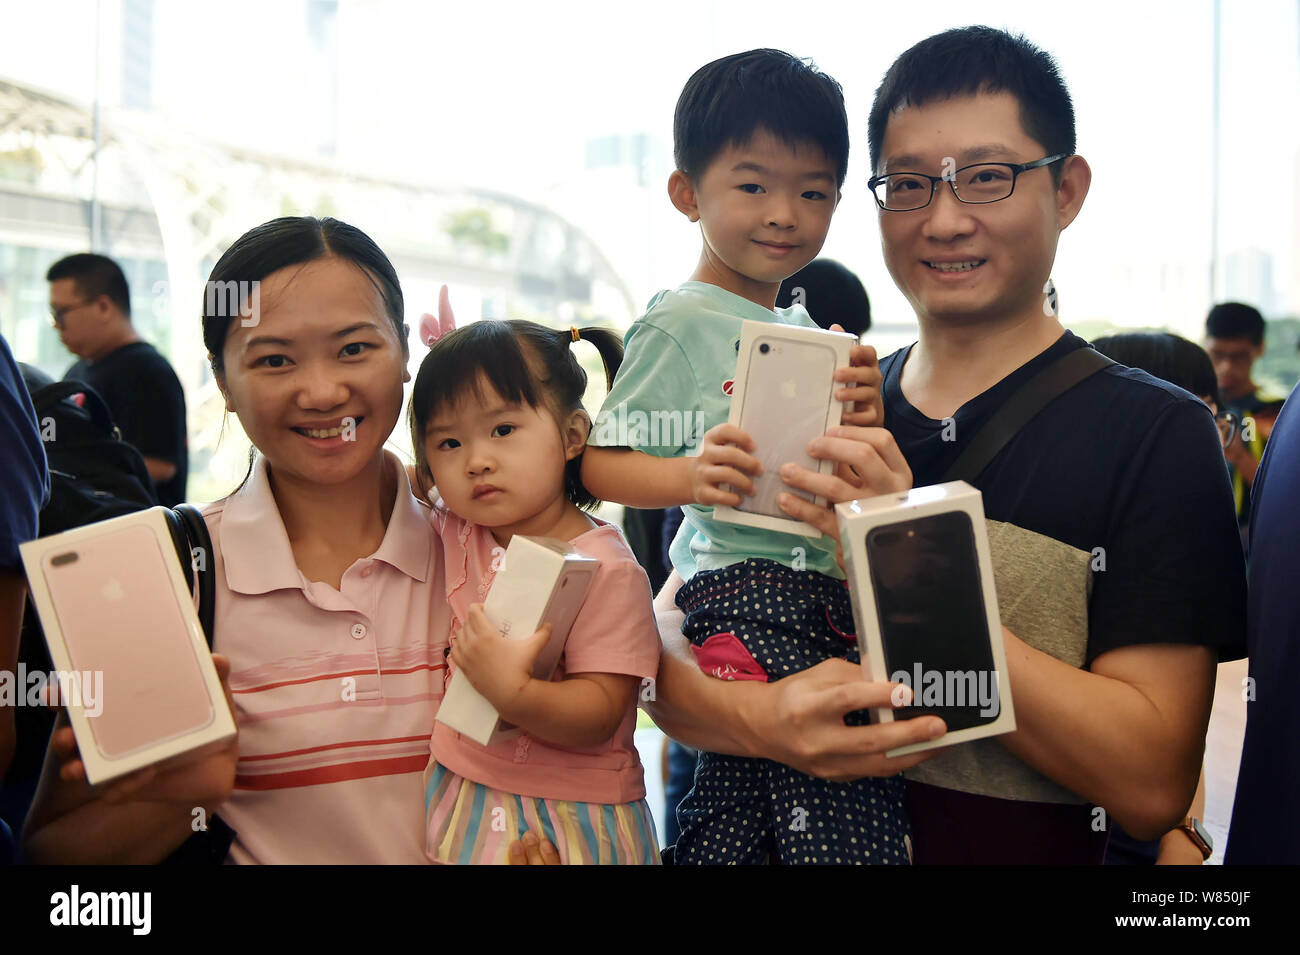 A Chinese family of four shows iPhone 7 and 7 Plus smartphones they bought at an Apple Store in Guangzhou city, south China's Guangdong province, 16 S Stock Photo